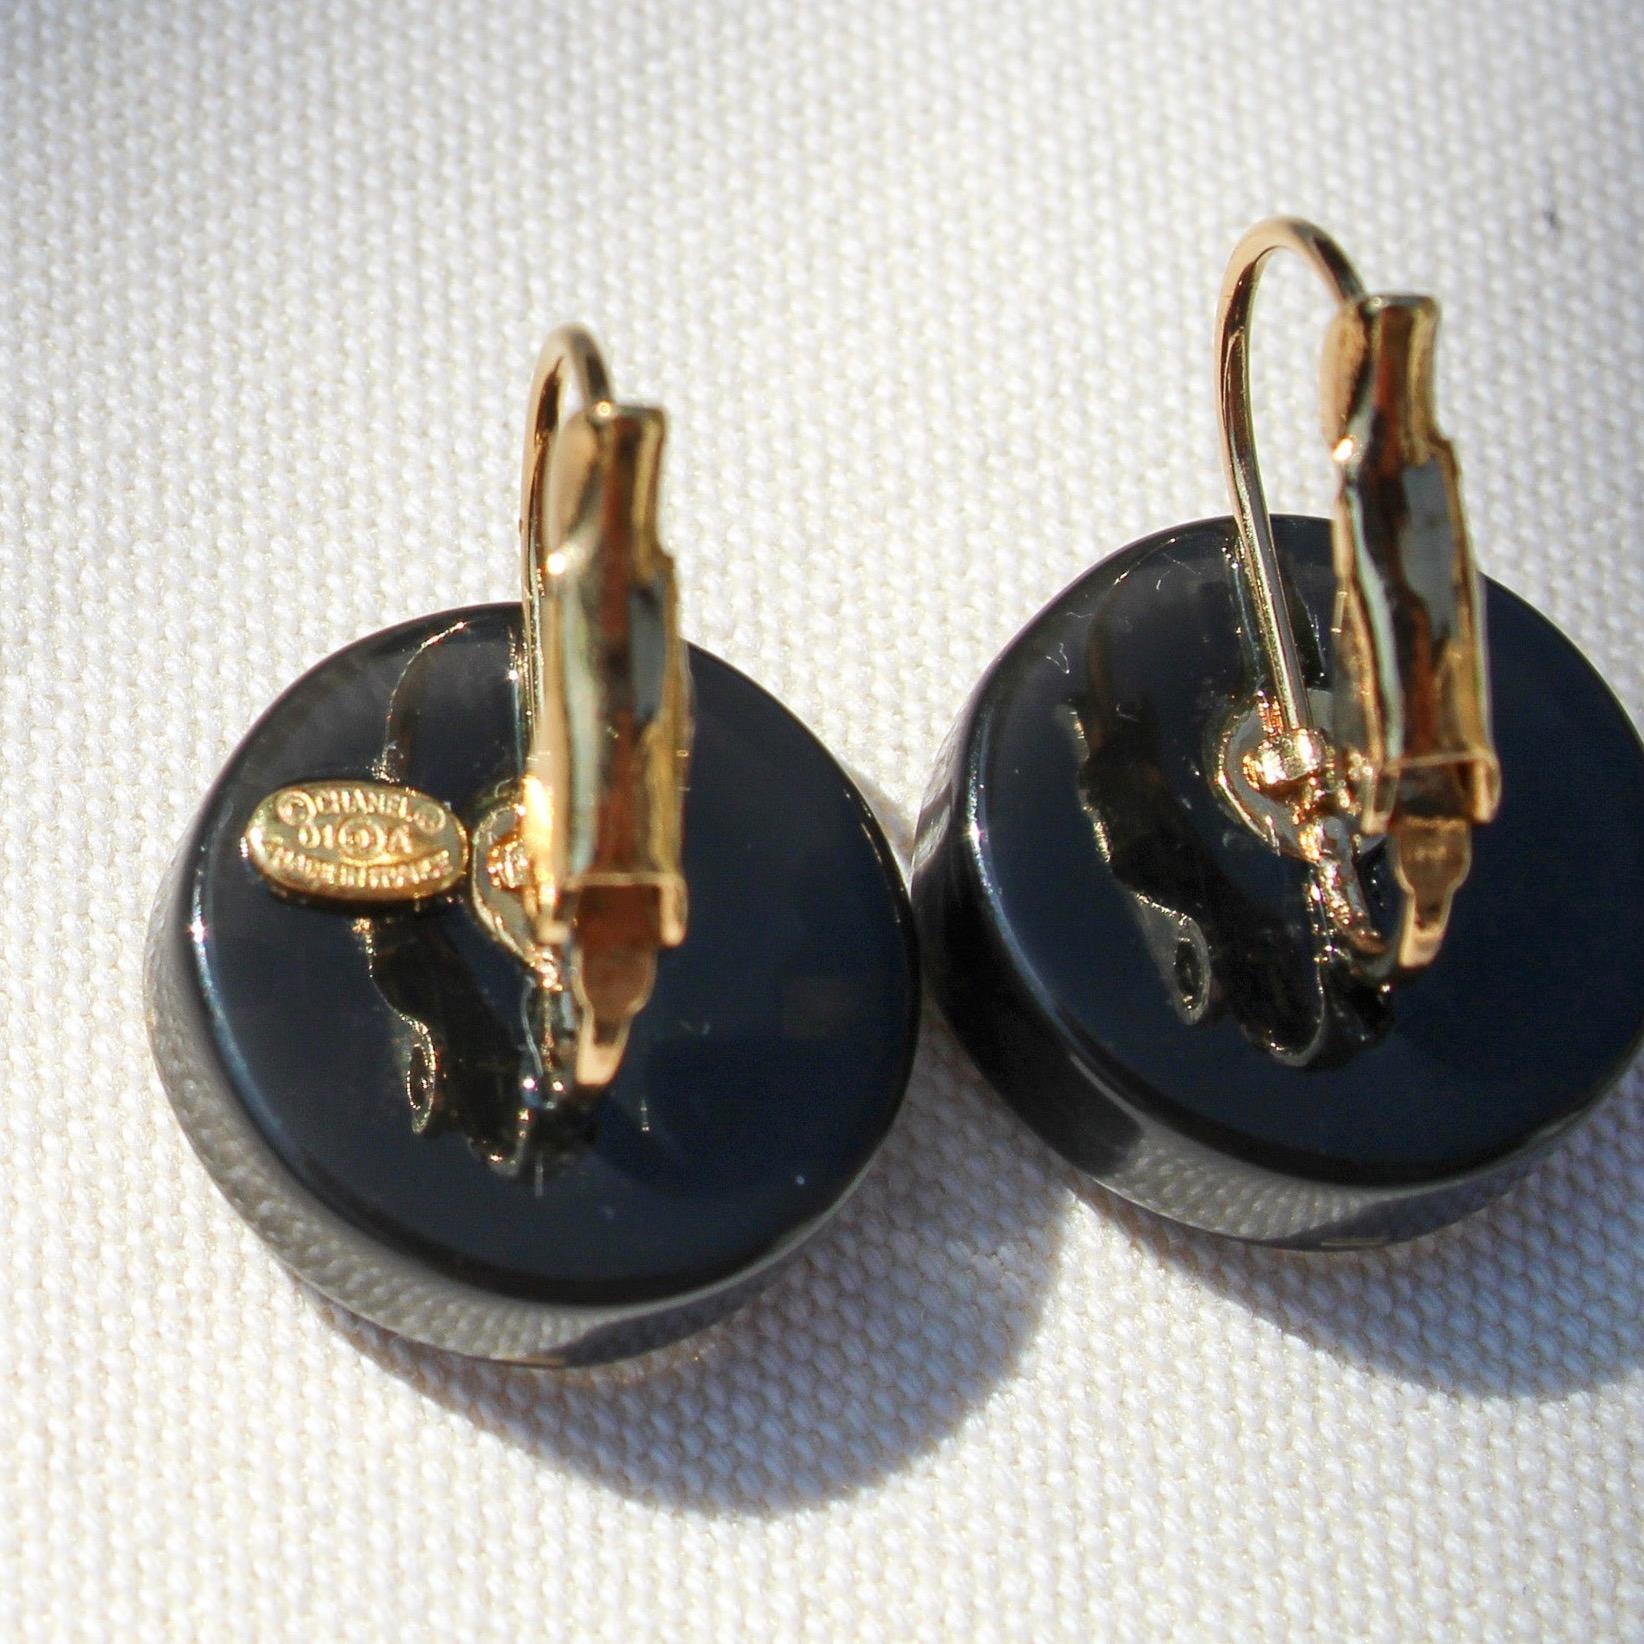 Vintage Y2K Chanel Earrings for Pierced Ears - 2001 Autumn Winter Collection 3